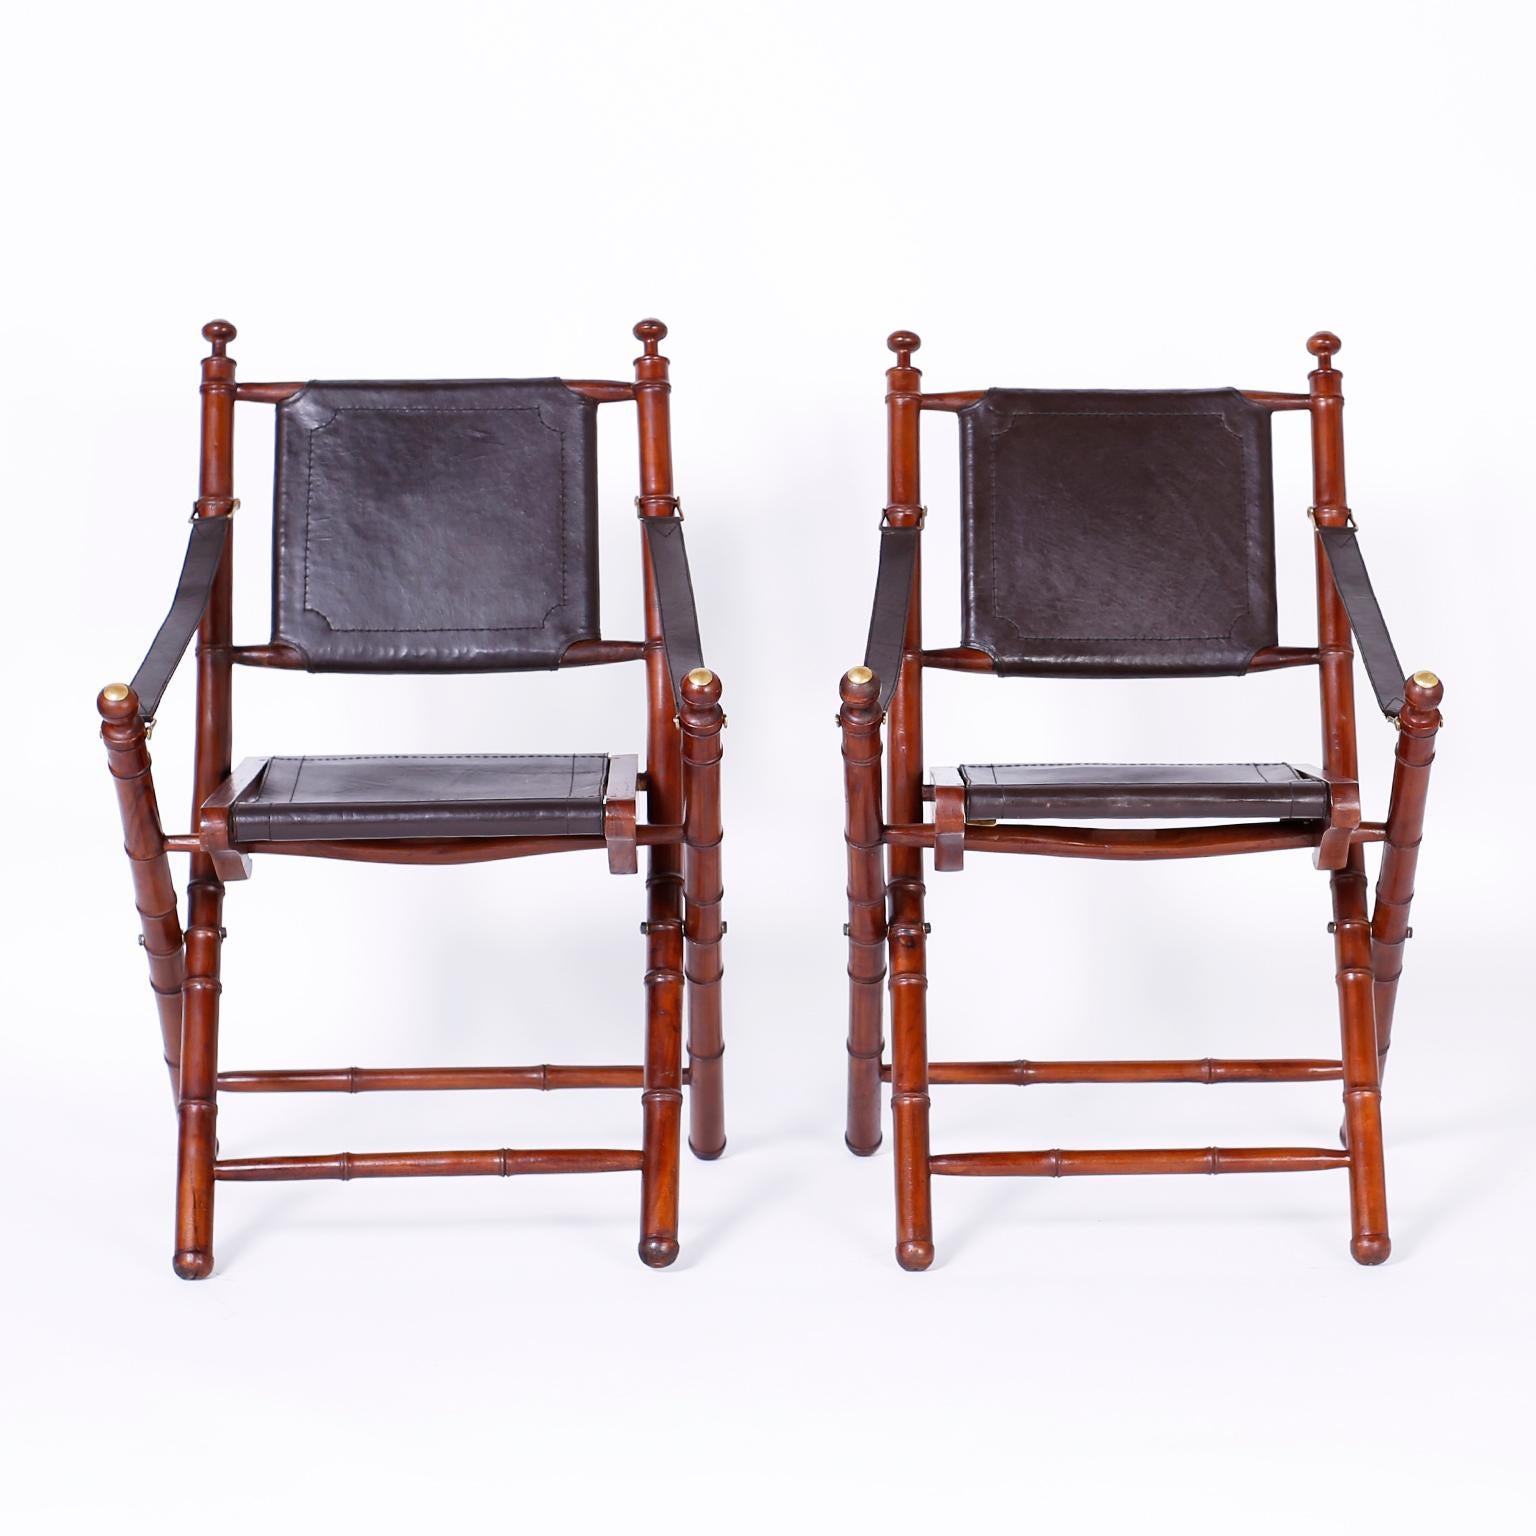 Pair of midcentury folding faux bamboo chairs expertly crafted in mahogany with brass hardware and soft leather backs, seats, and strap arms.